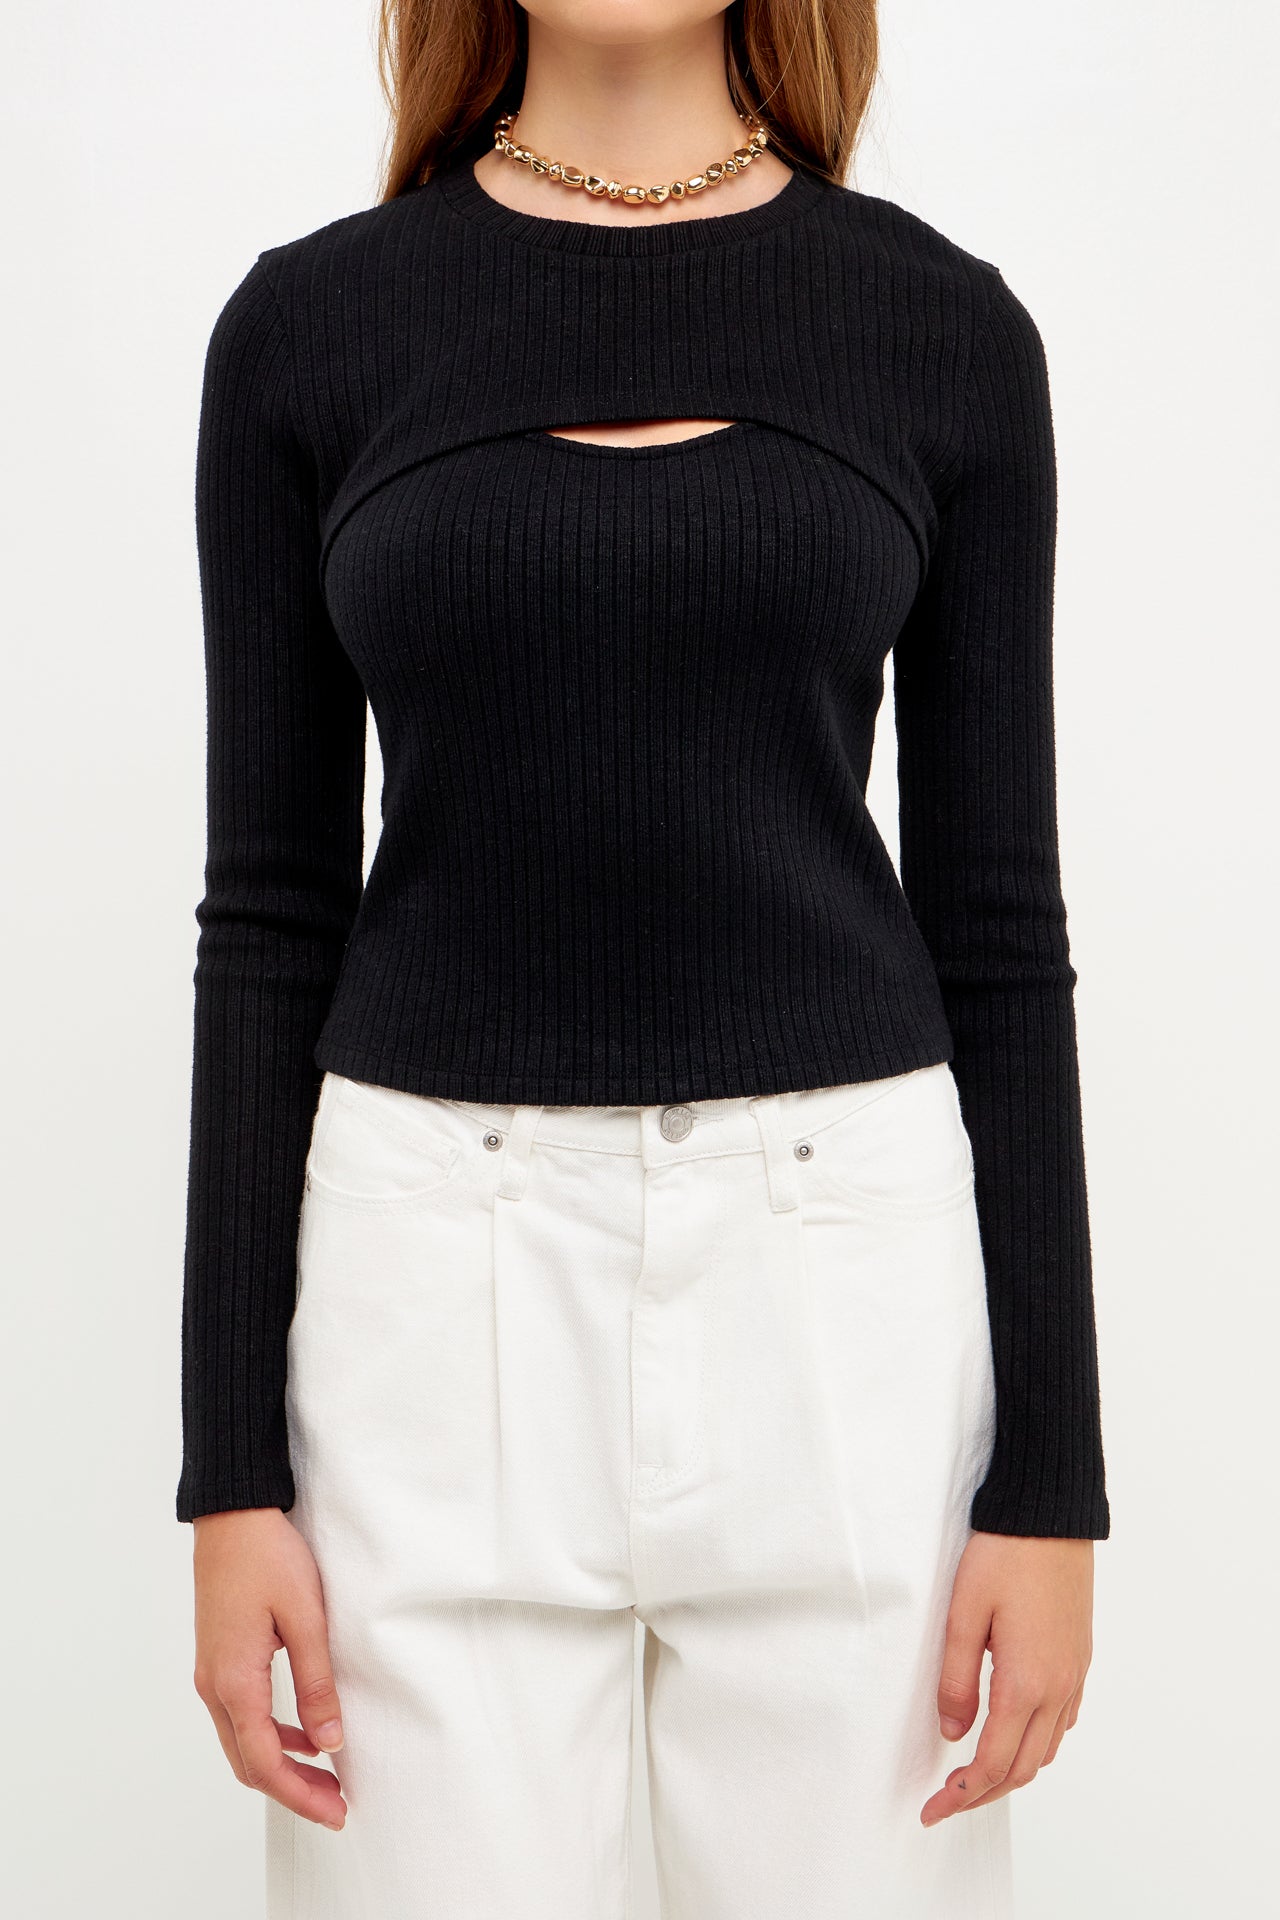 GREY LAB - 2 Piece Knit Top - TOPS available at Objectrare